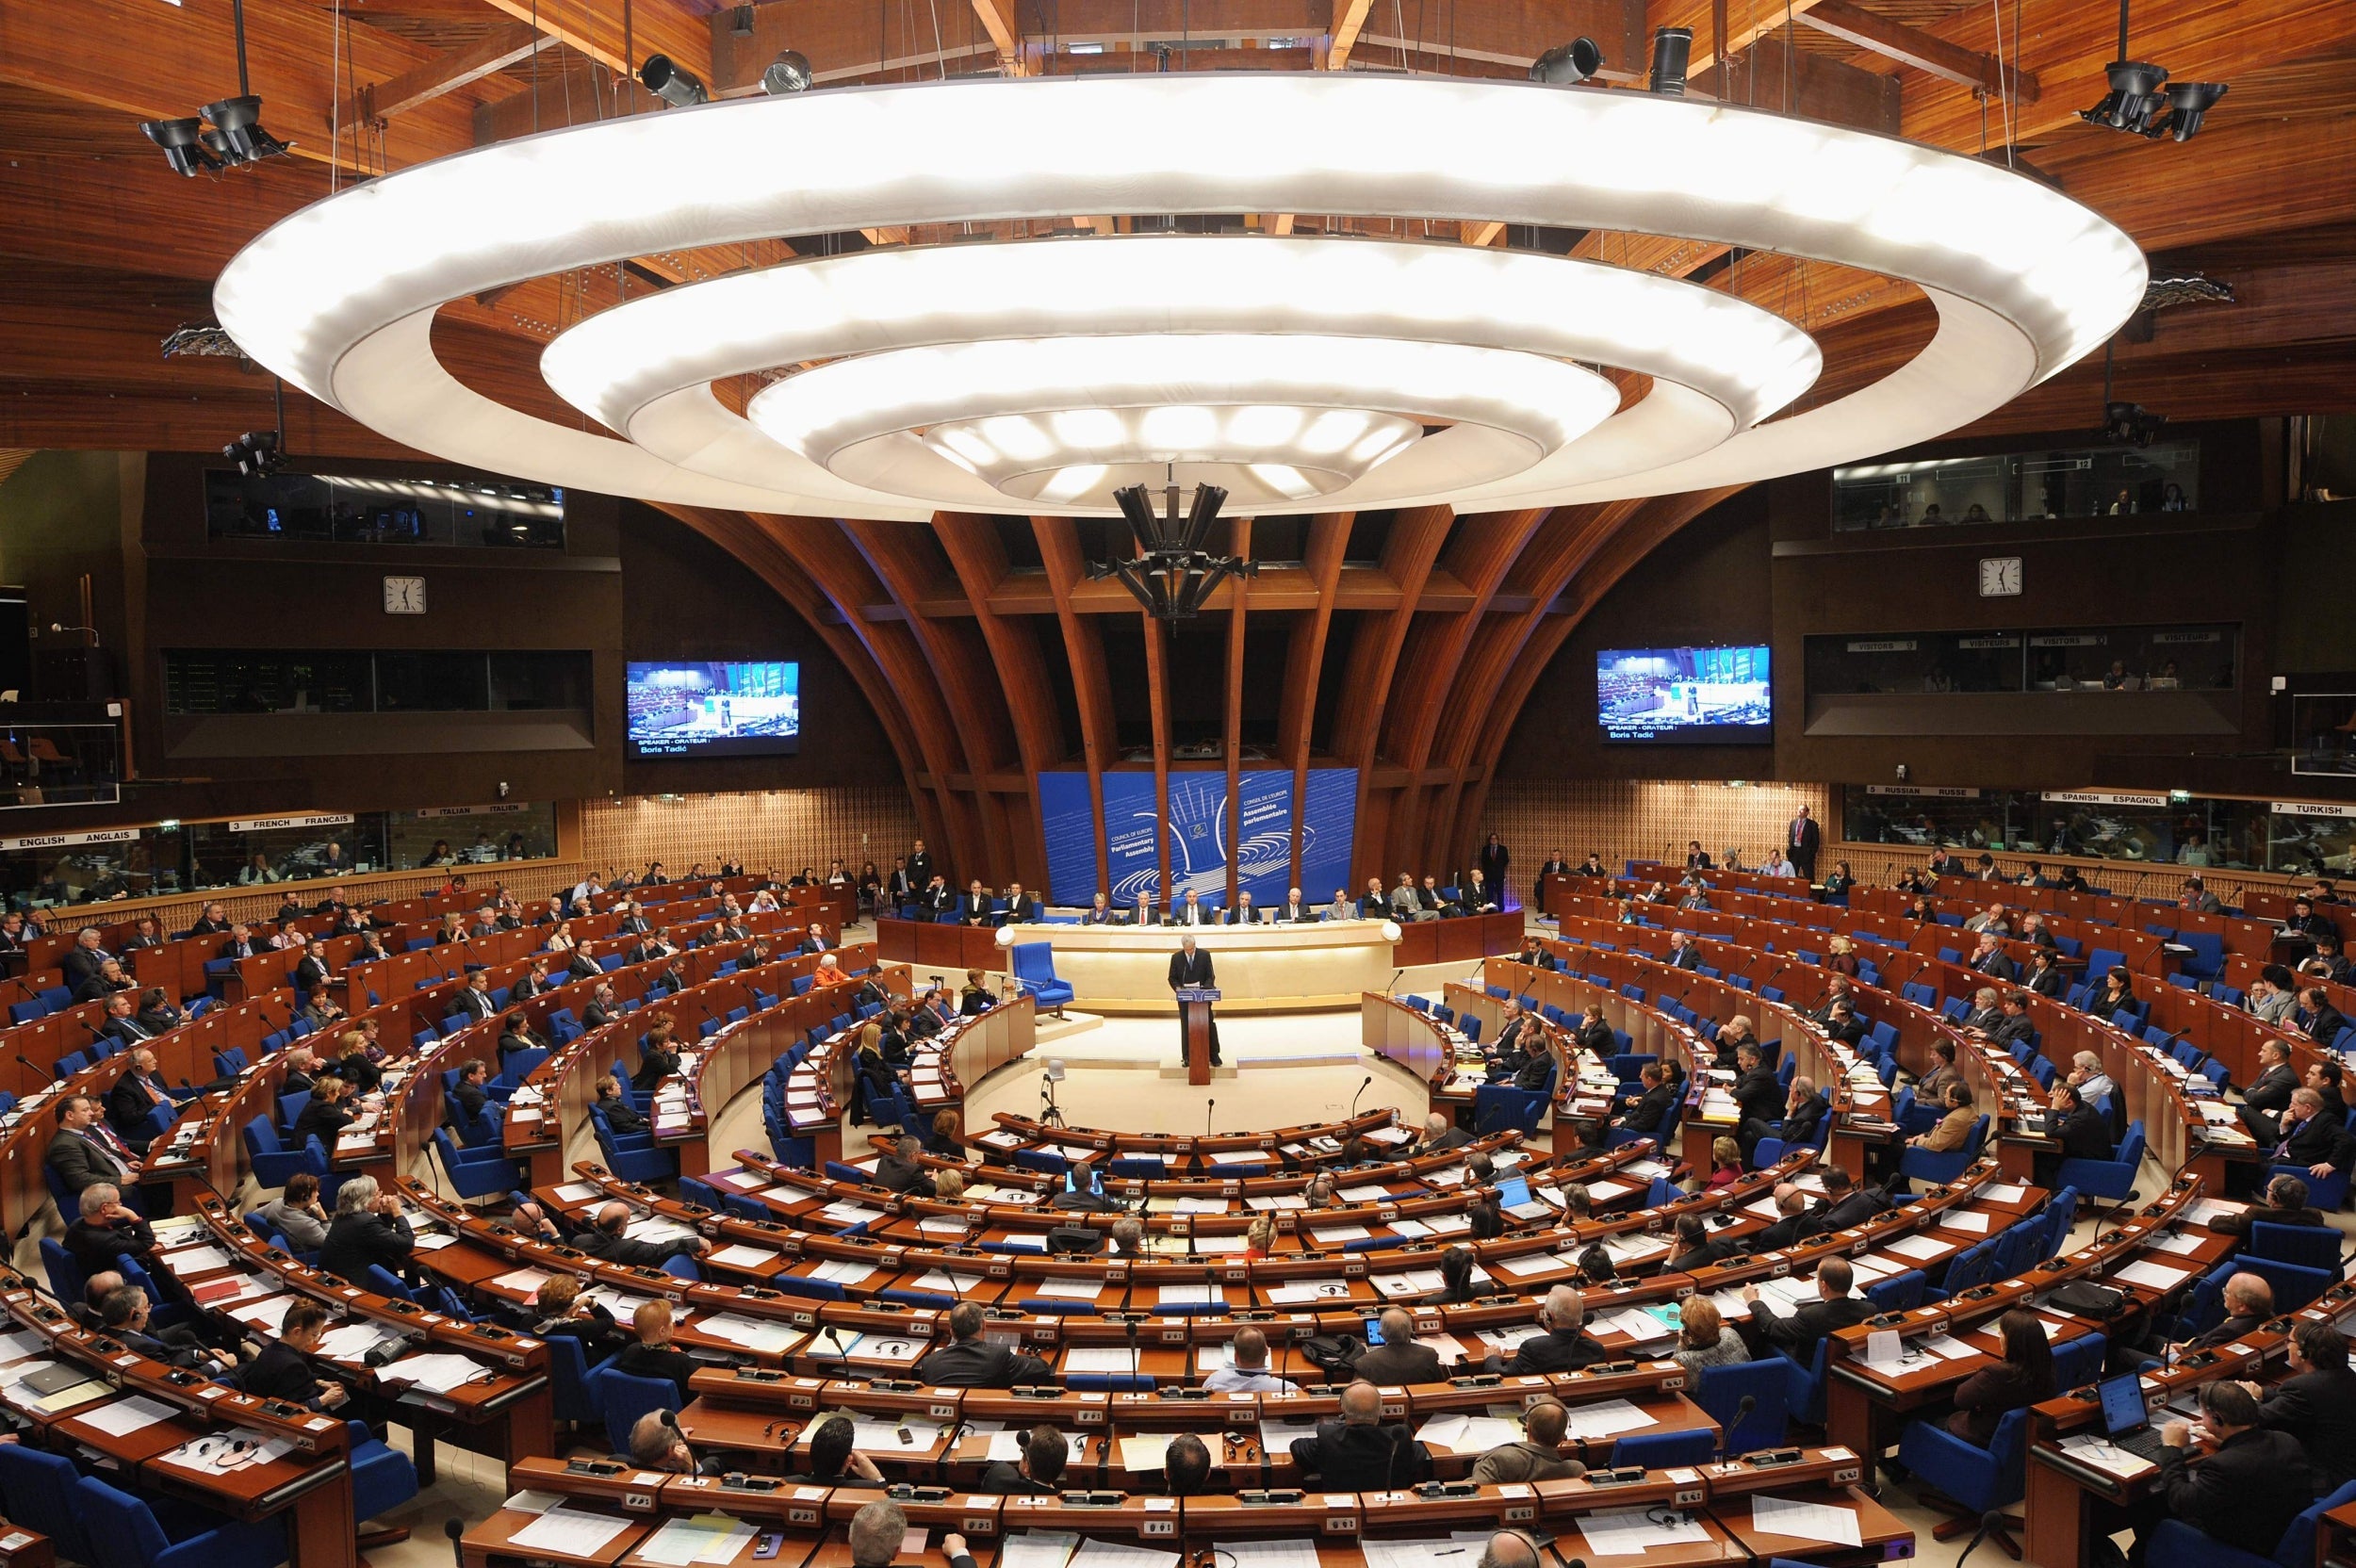 The Council of Europe parliamentary assembly in Strasbourg